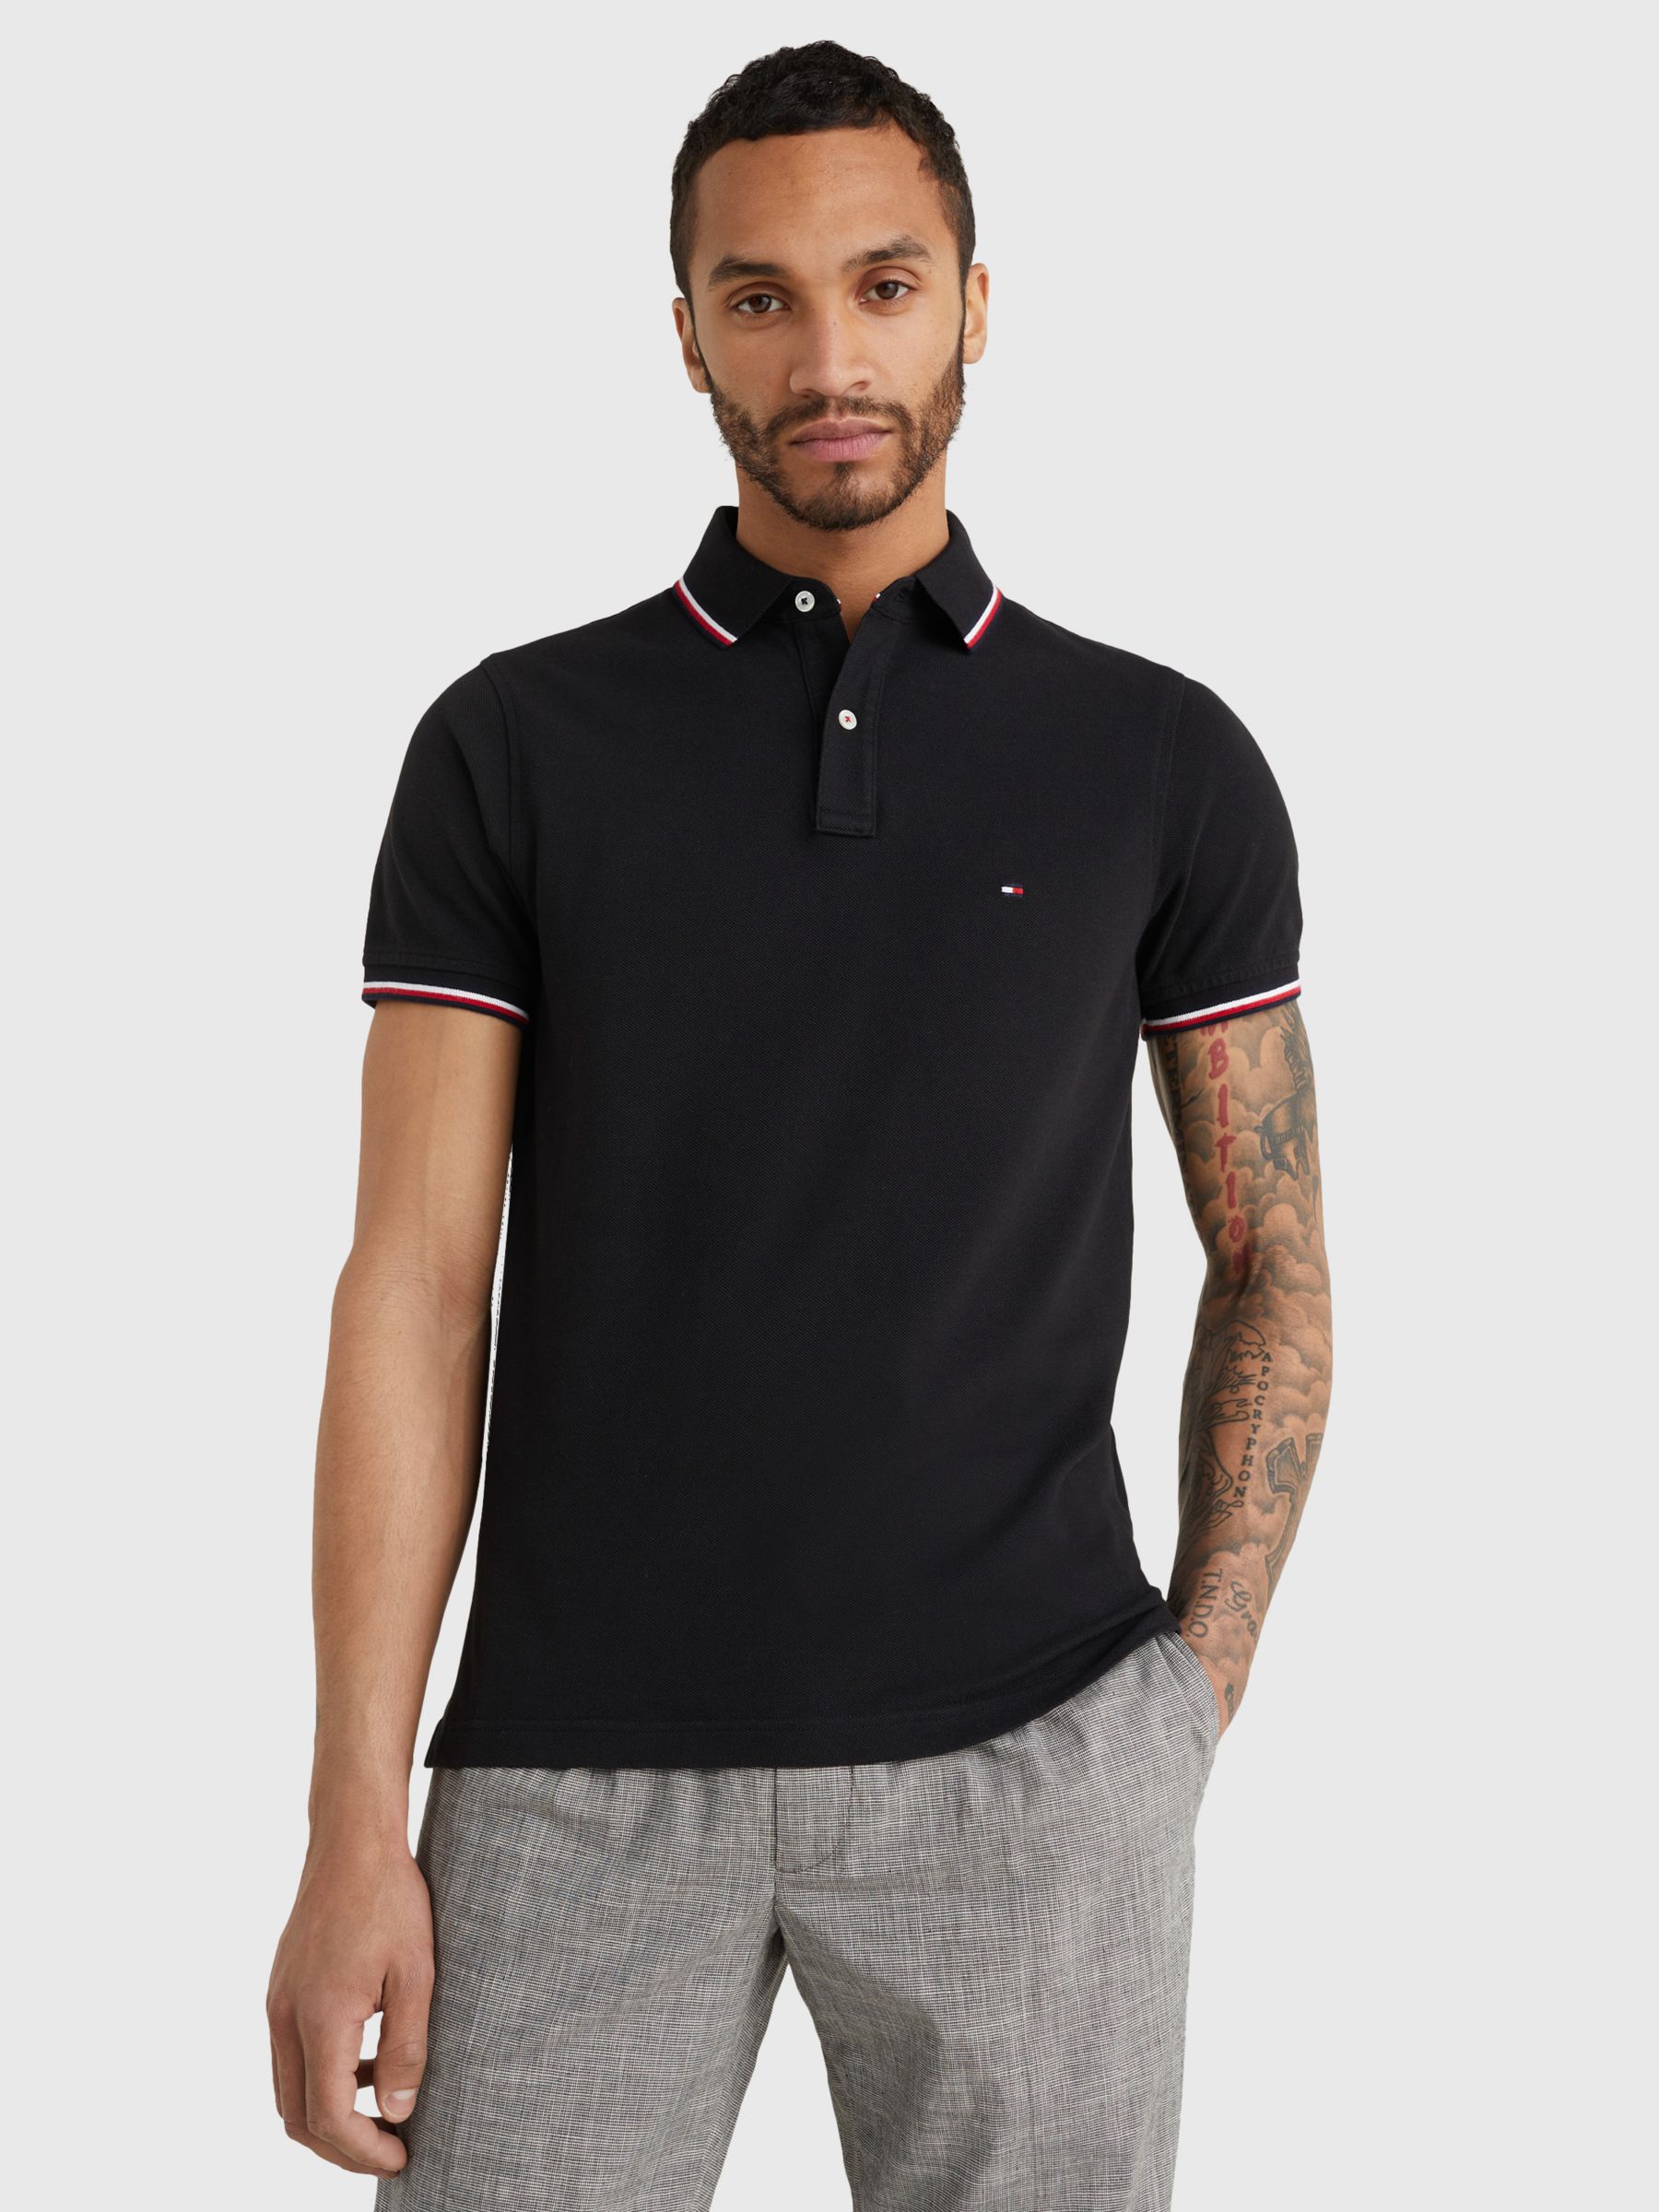 Tommy Hilfiger Tipped Organic Cotton Slim Fit Polo Shirt, Black at